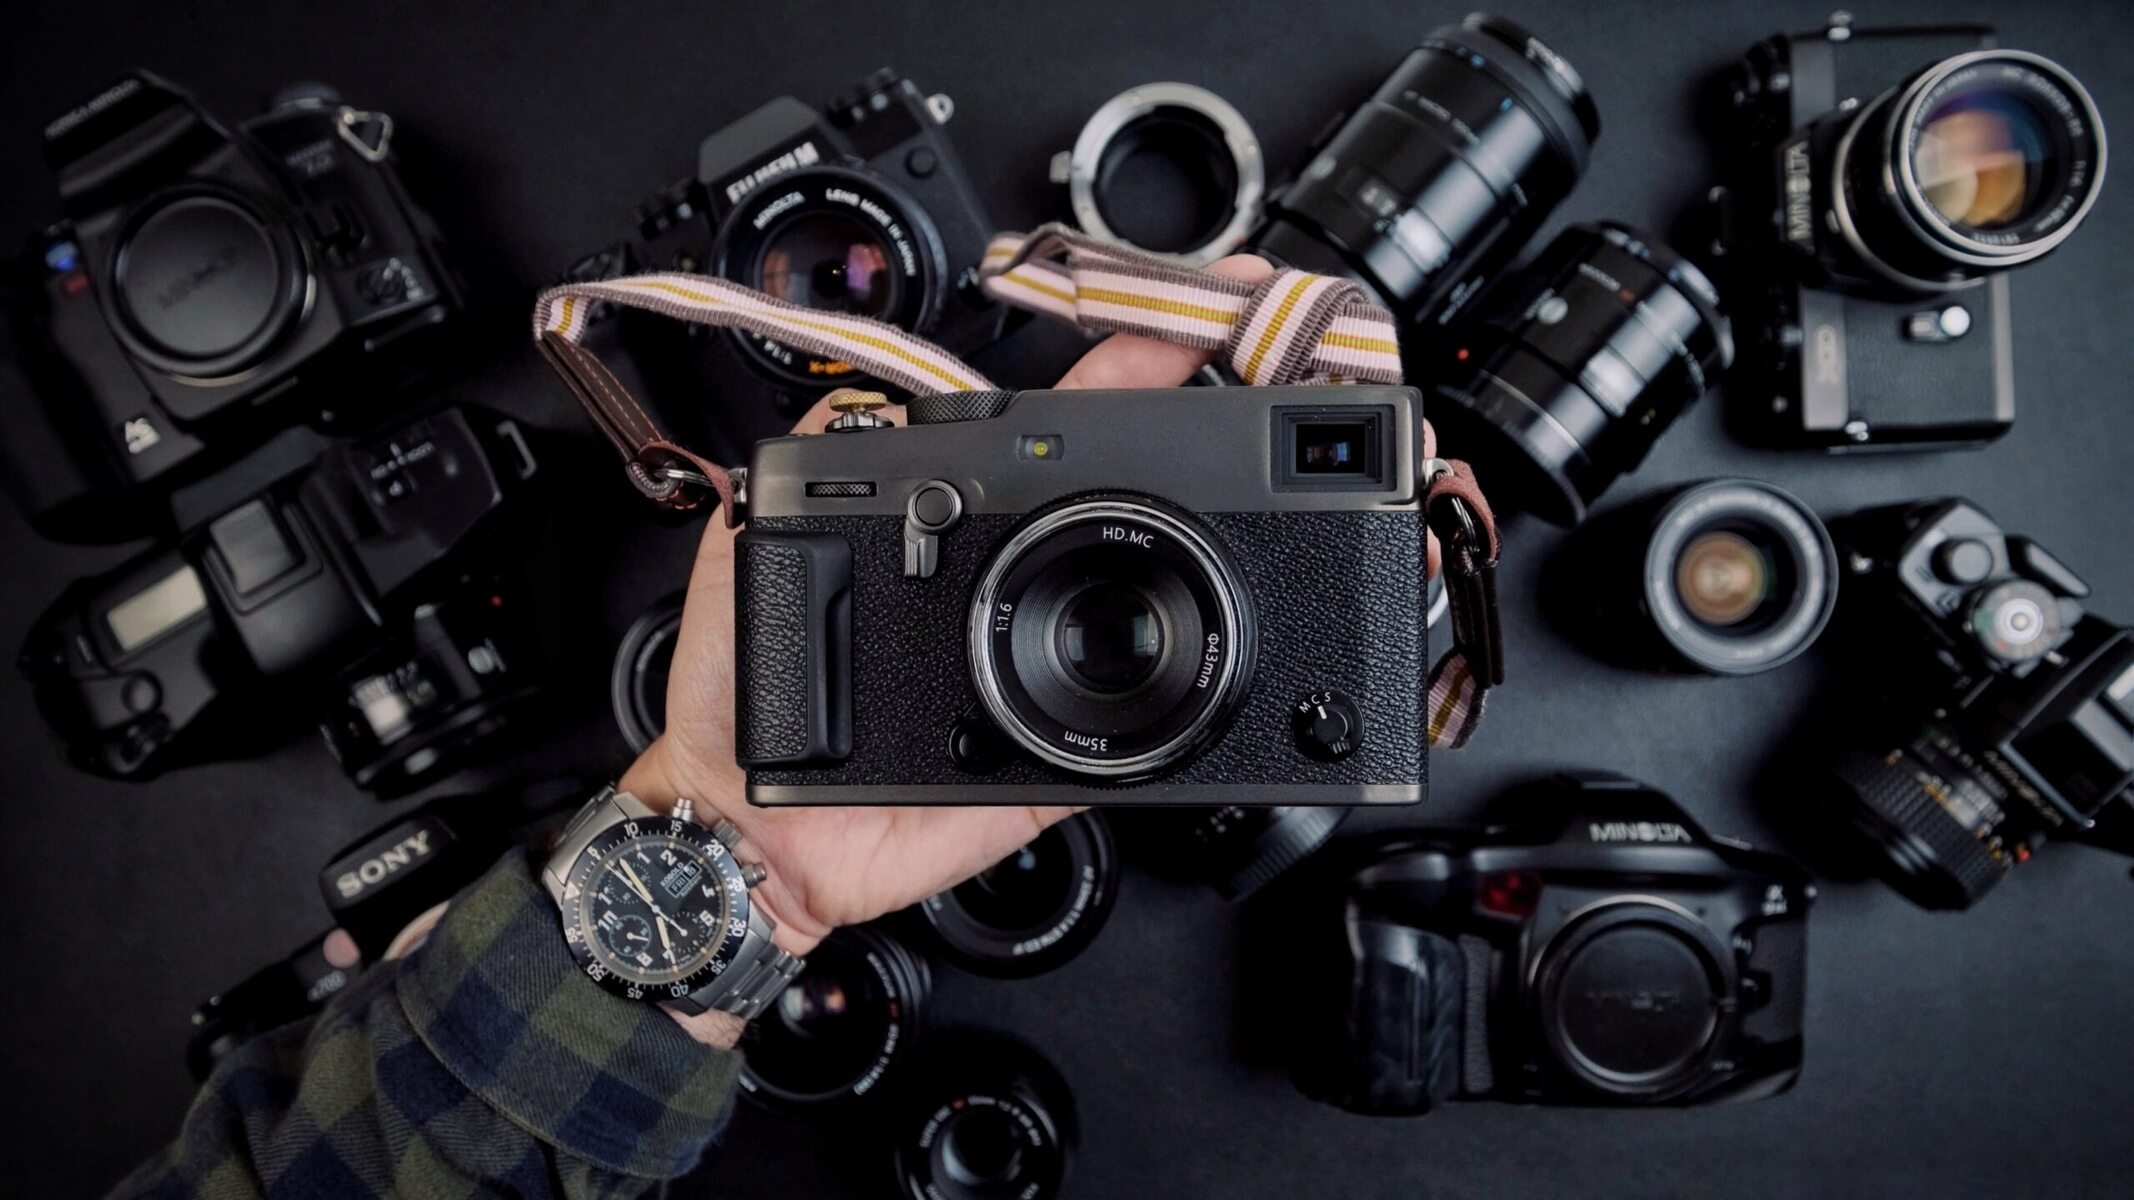 What Is The Difference Between Fujifilm Mirrorless Camera And Other Brands In Image Quality